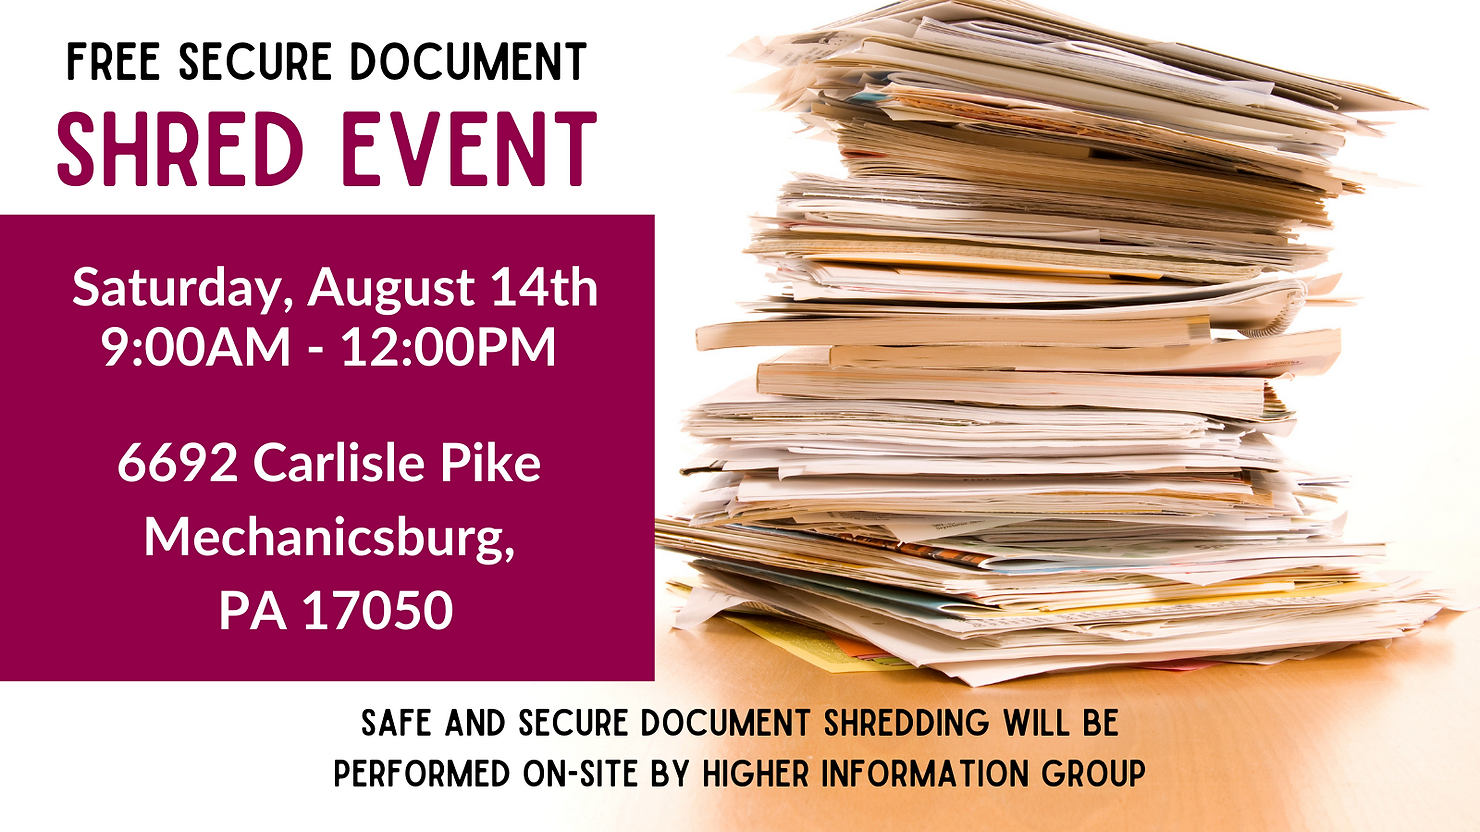 Come visit NCFCU at our local FREE document shredding events! NCFCU